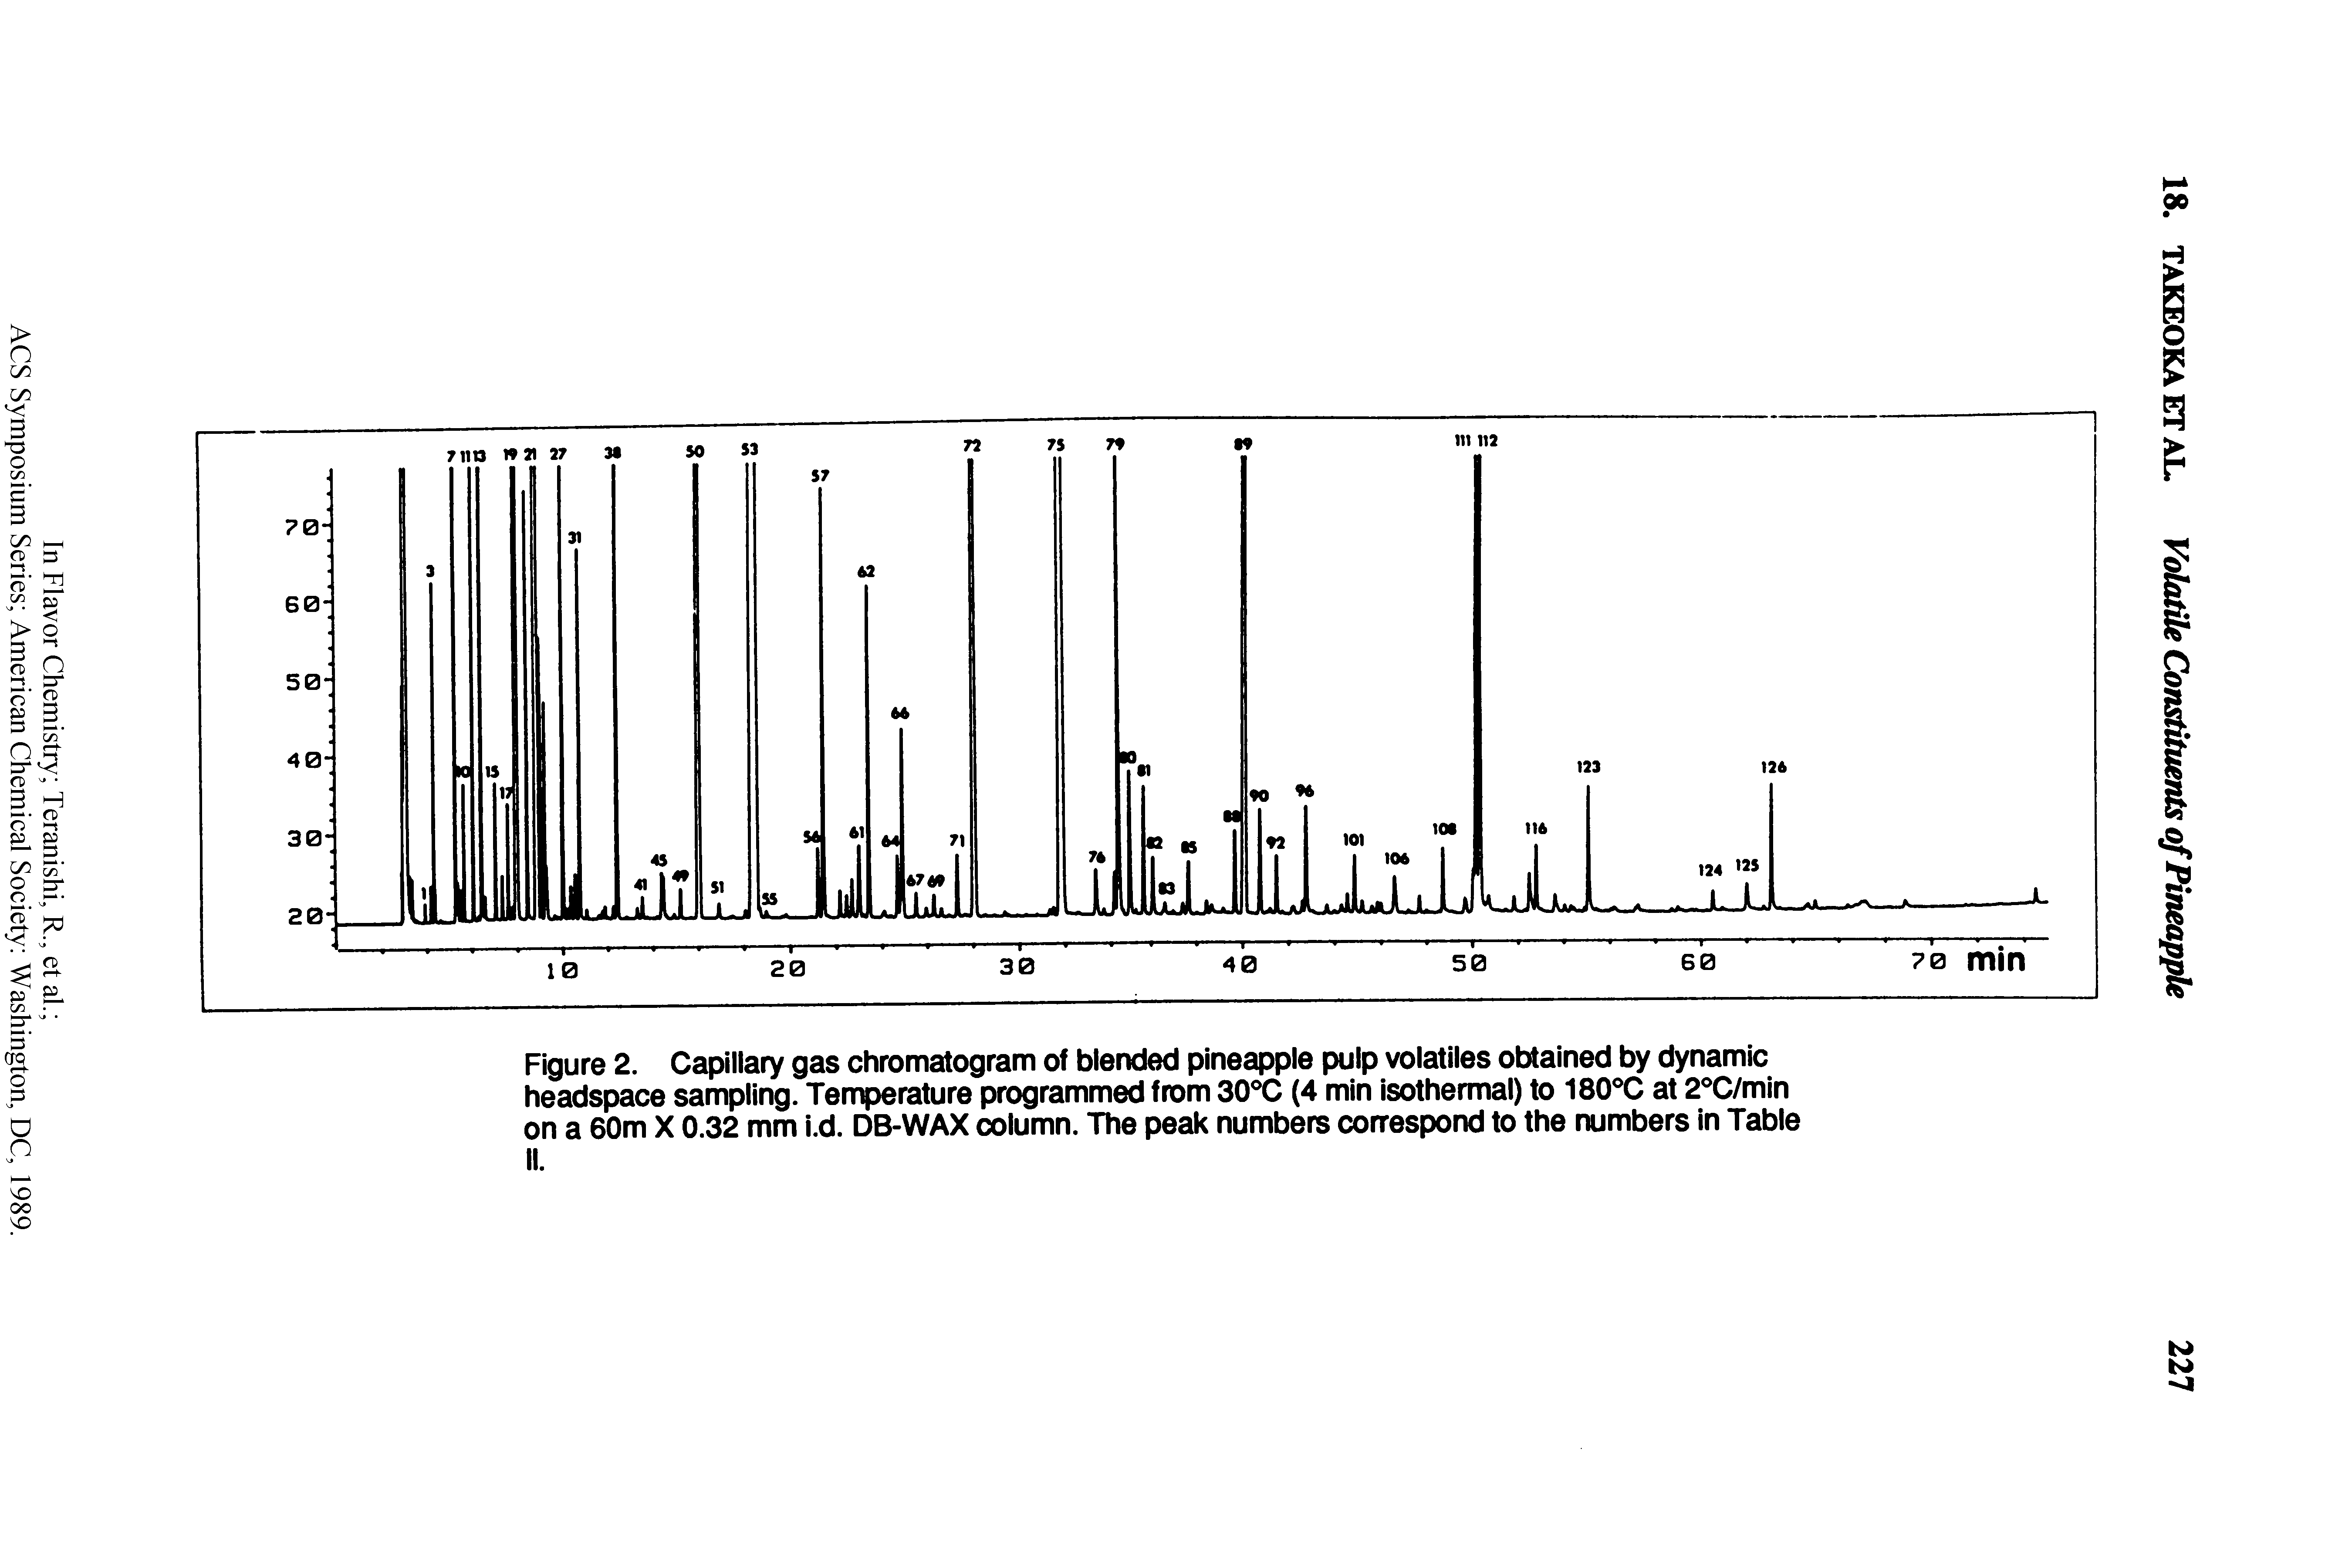 Figure 2. Capillary gas chromatogram of blended pineapple pulp volatiles obtained by dynamic headspace sampling. Temperature programmed from SOX (4 min isothermal) to 180X at 2X/min on a 60m X 0.32 mm i.d. DB-WAX column. The peak numbers correspond to the numbers in Table II.